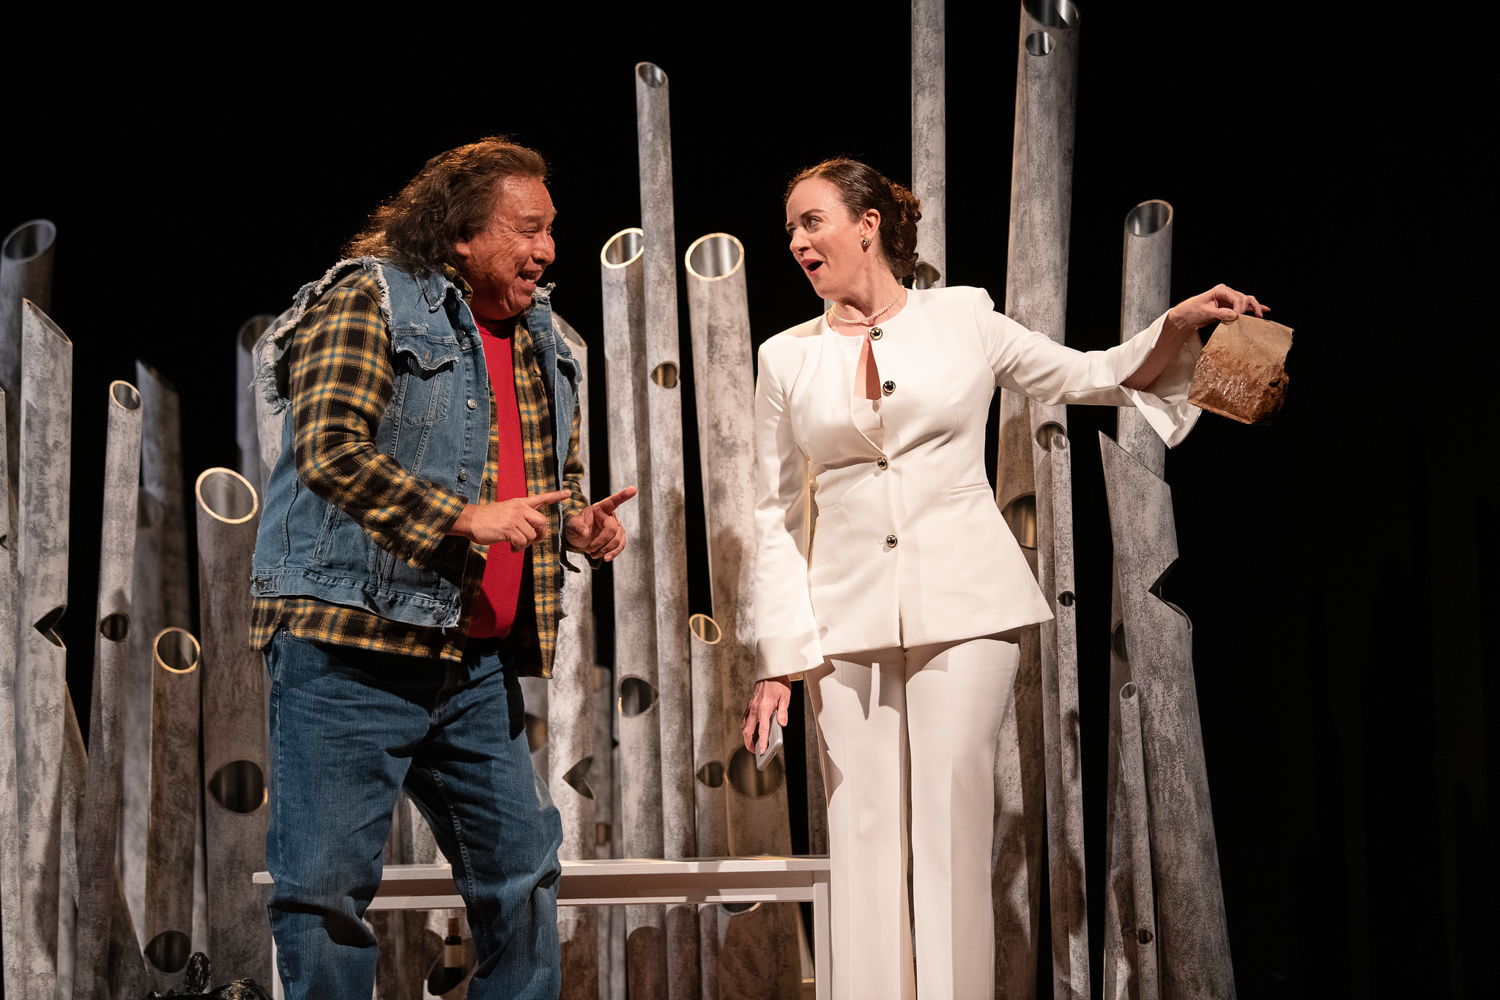 Sam Bob and Luisa Jojic in Little Red Warrior & His Lawyer by Kevin Loring / Photo by Emily Cooper